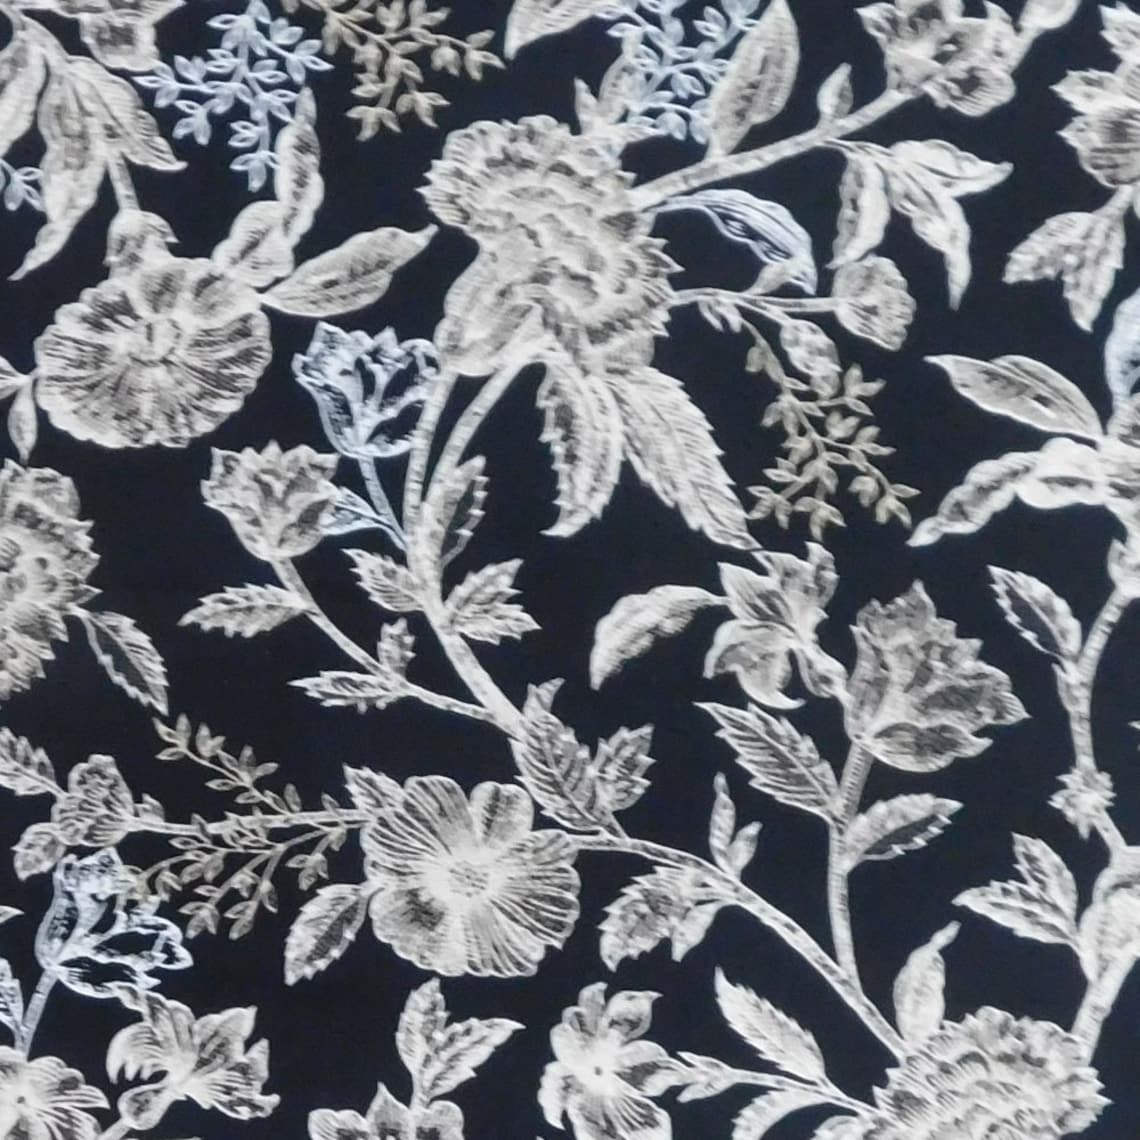 Quilting Patchwork Sewing Fabric Black Floral 50x55cm FQ - Etsy